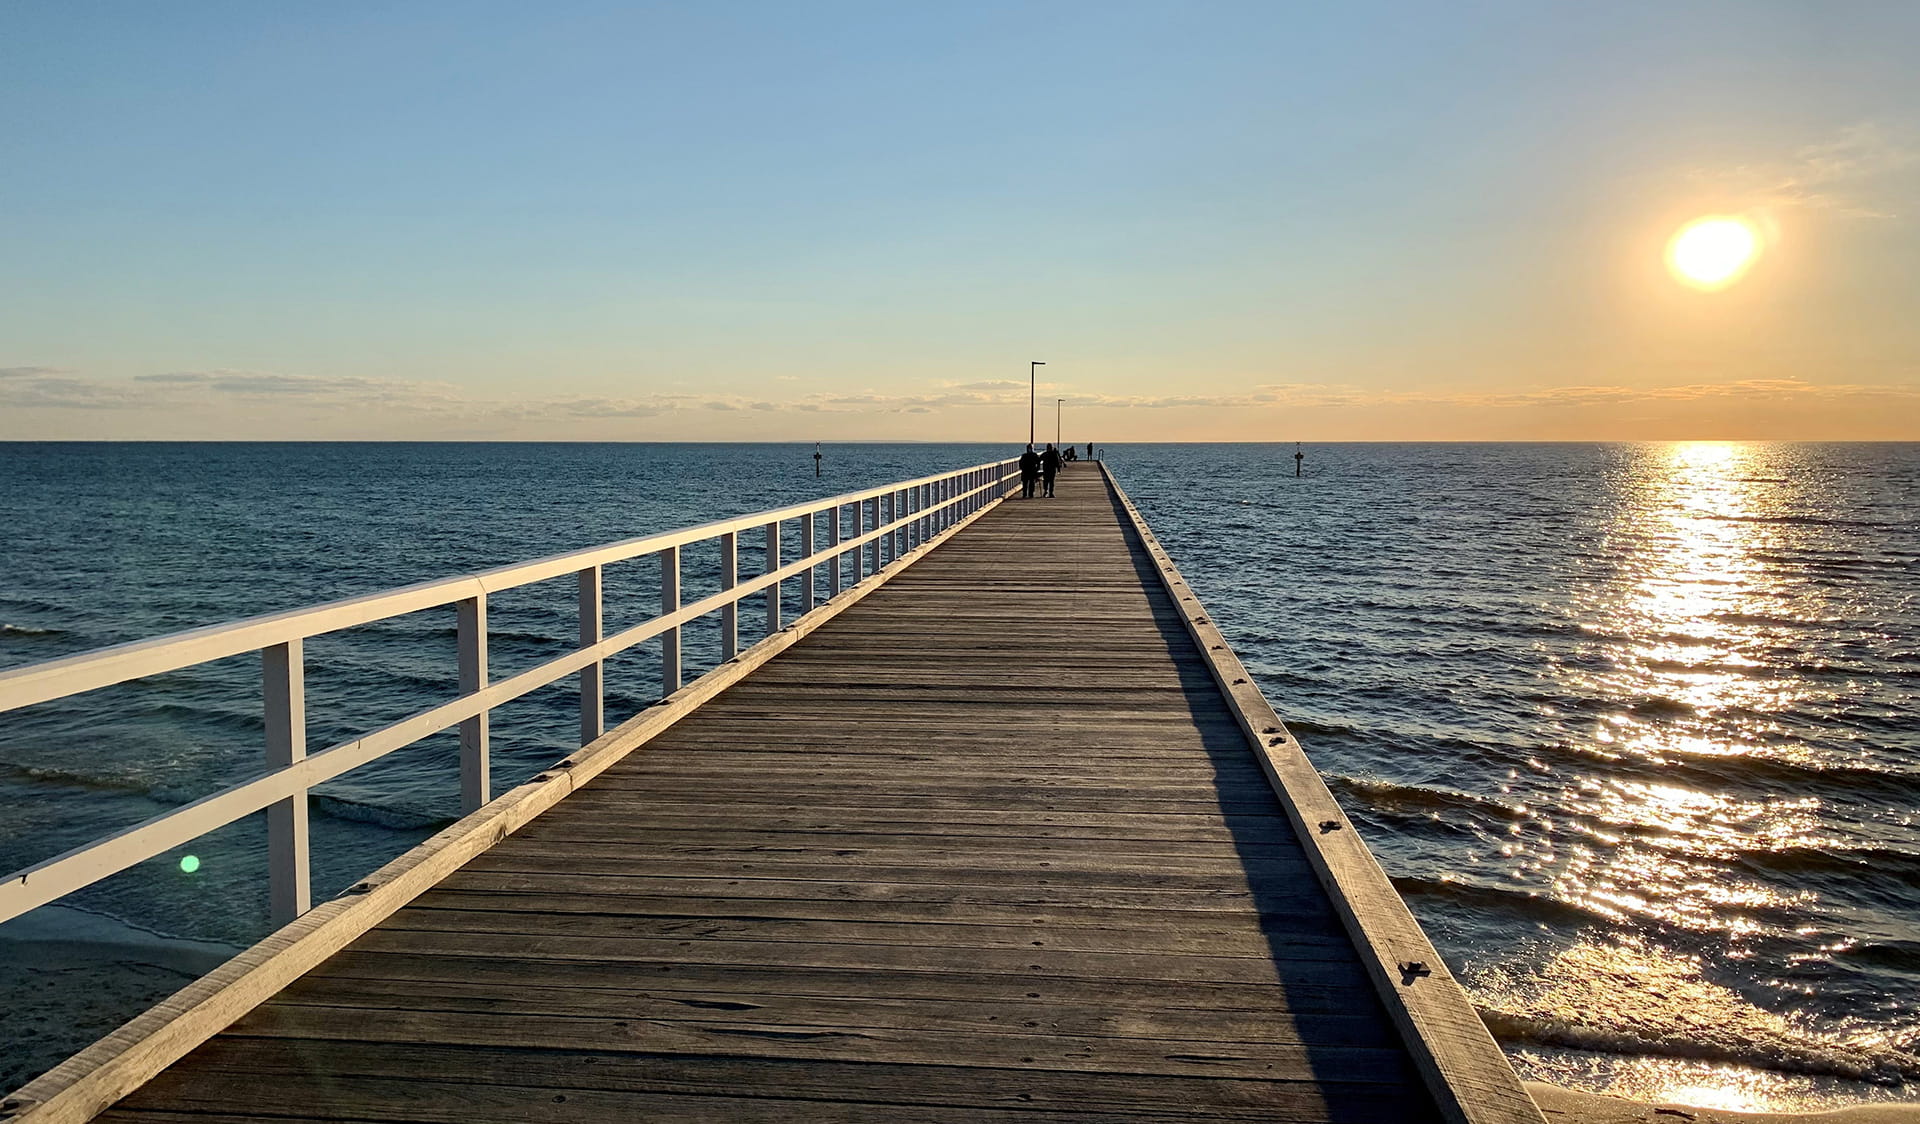 A wooden pier over the water at sunset.